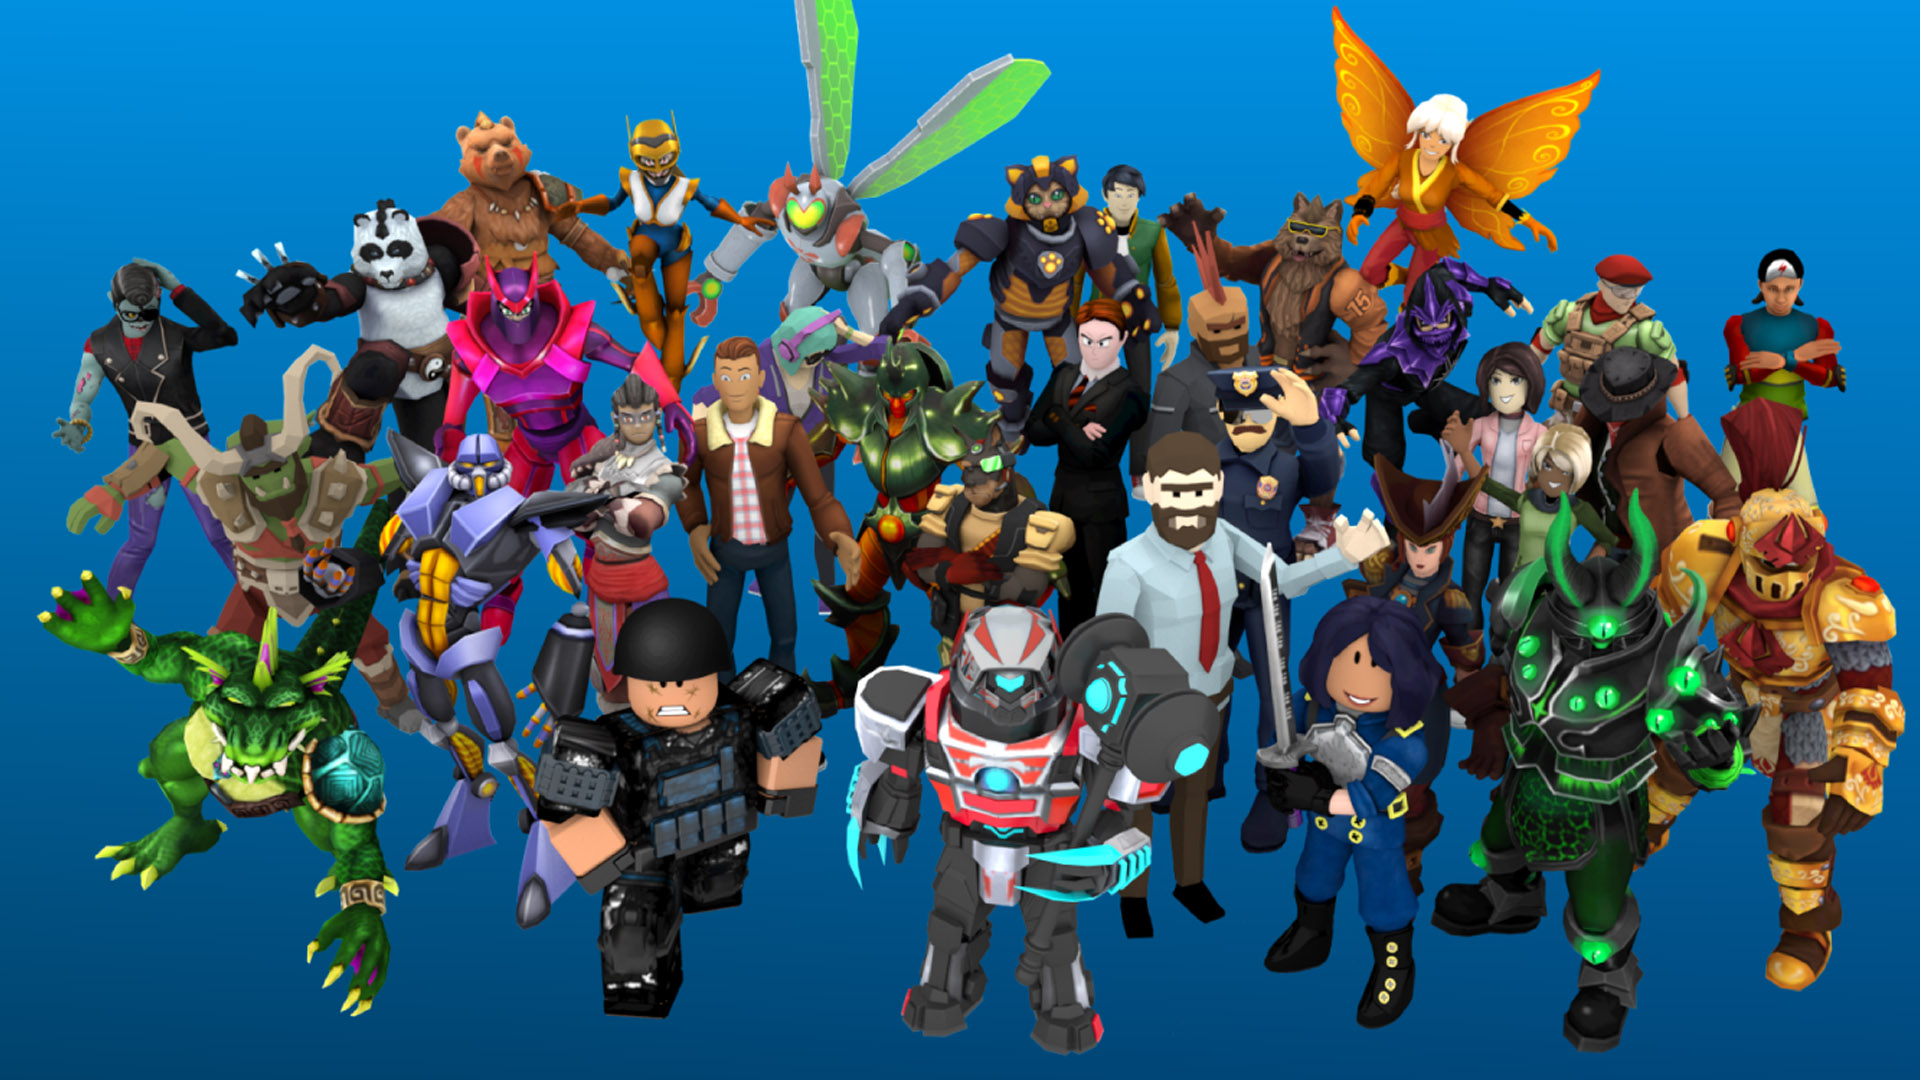 Best iOS games: Roblox. Image shows a group of Roblox characters.